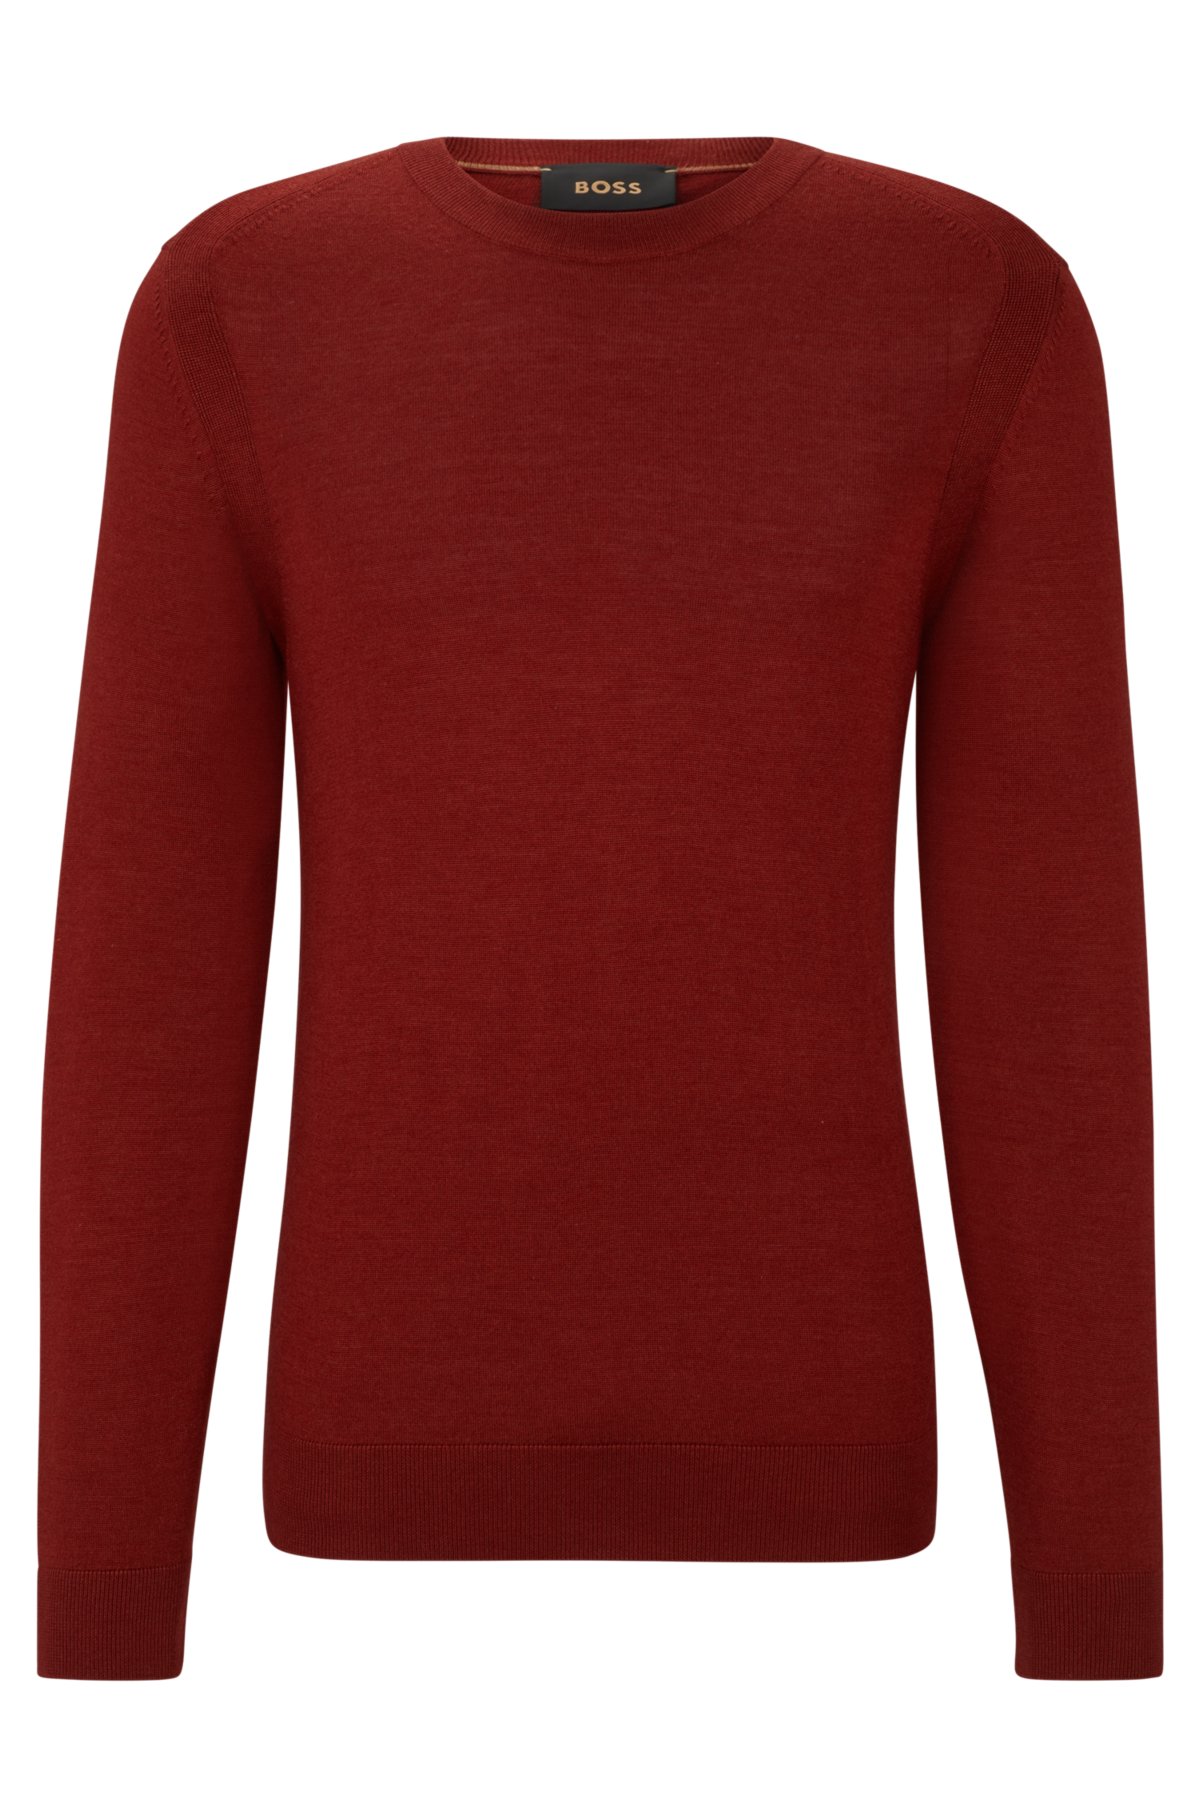 Regular-fit sweater in wool, silk and cashmere, Red